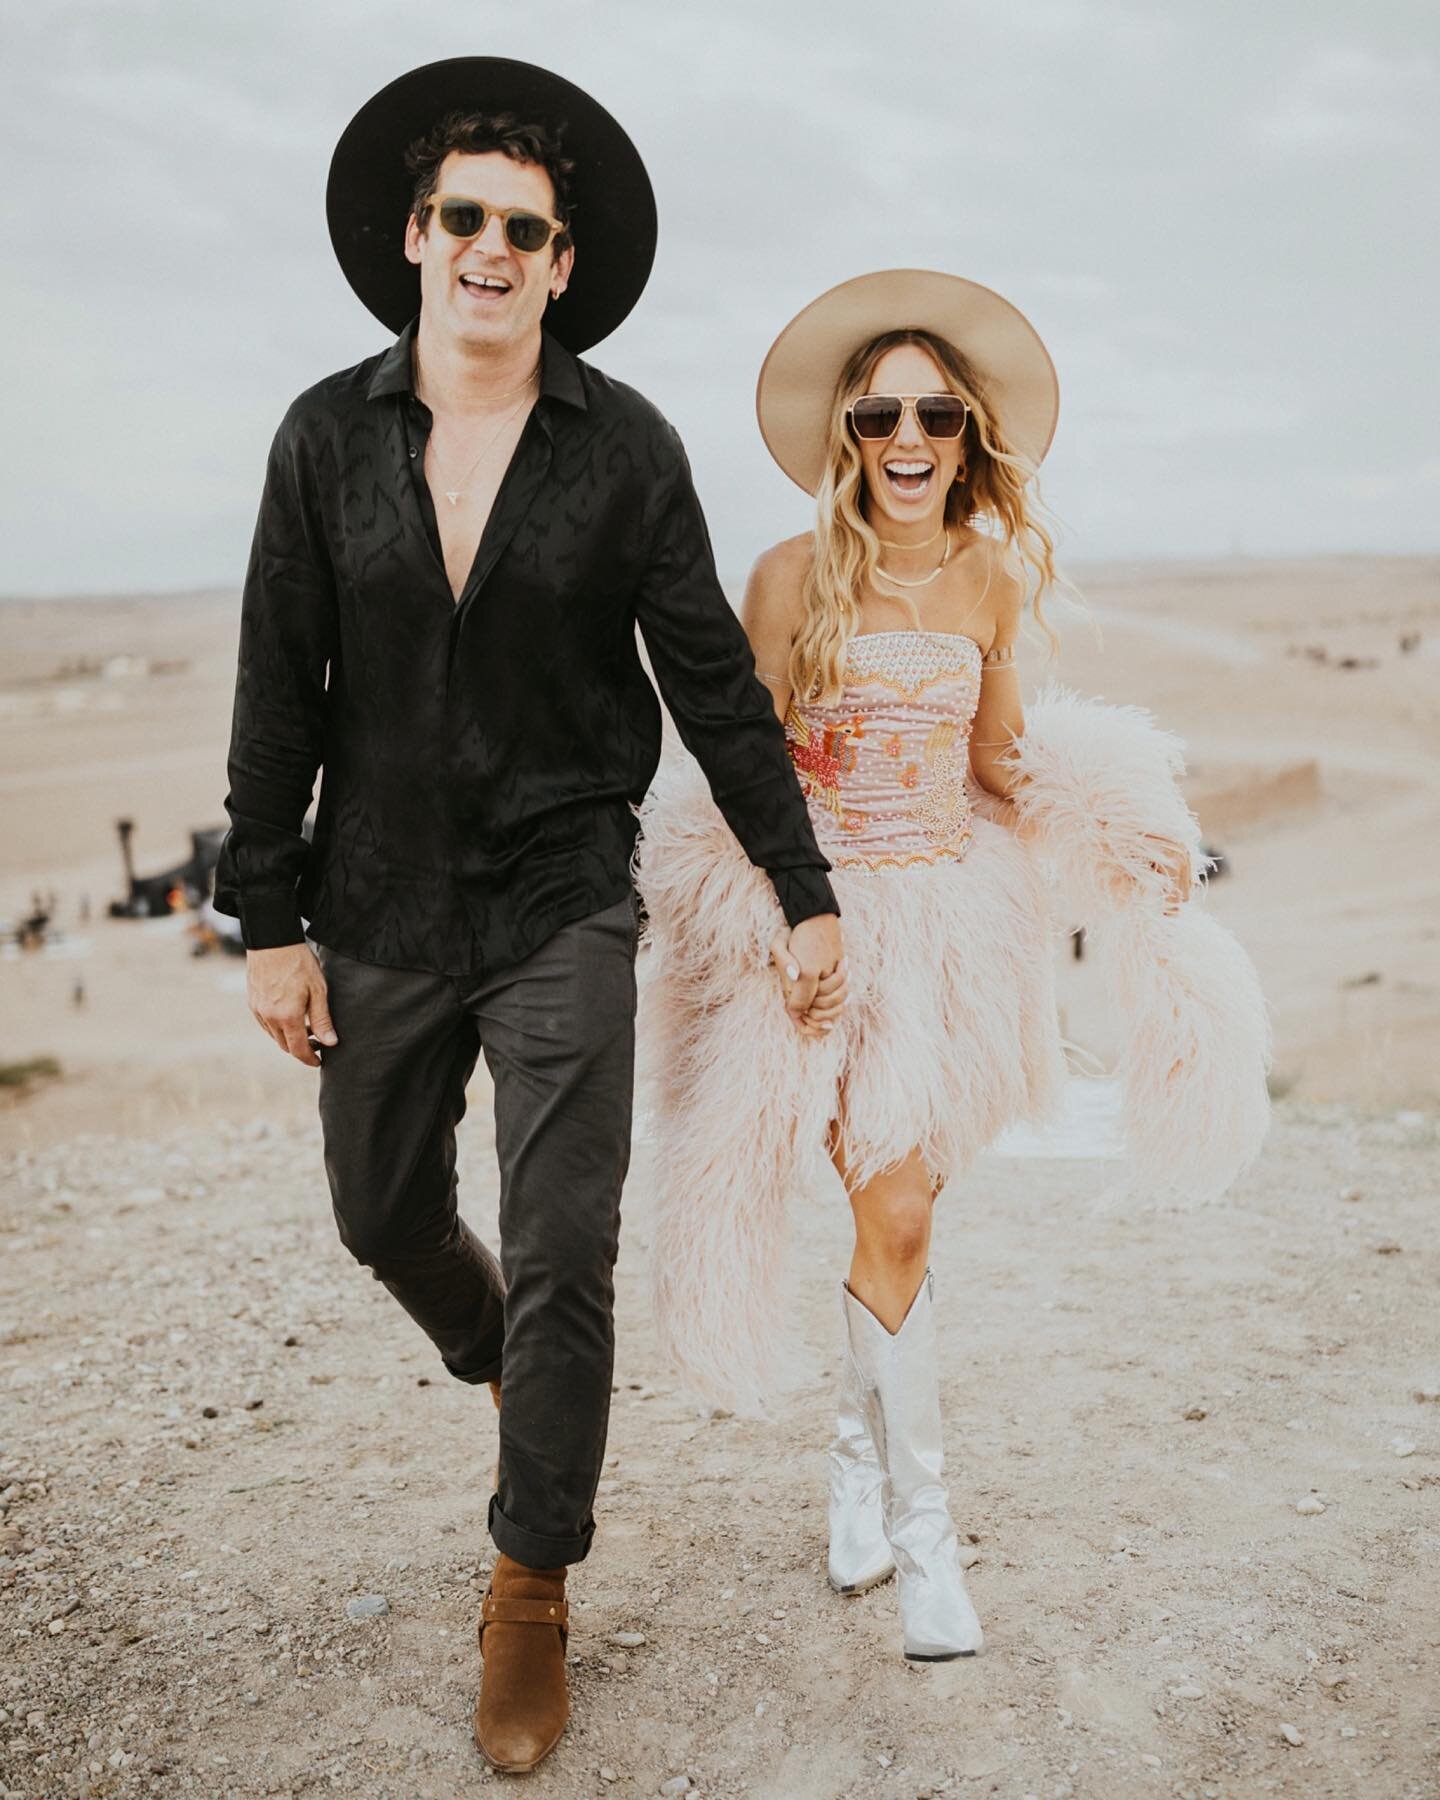 That Agafay desert x Burning Man x all the goodness, kind of feeling 🖤✌🏾

DREAM TEAM 💫
@croccaryan @fabrik_life
Photography @igordemba
Planner @boutiquesouk
@boutiquesouk_weddings 
Flowers @thebloomroom.marrakech 
Dress @anniesibiza 
Production @_